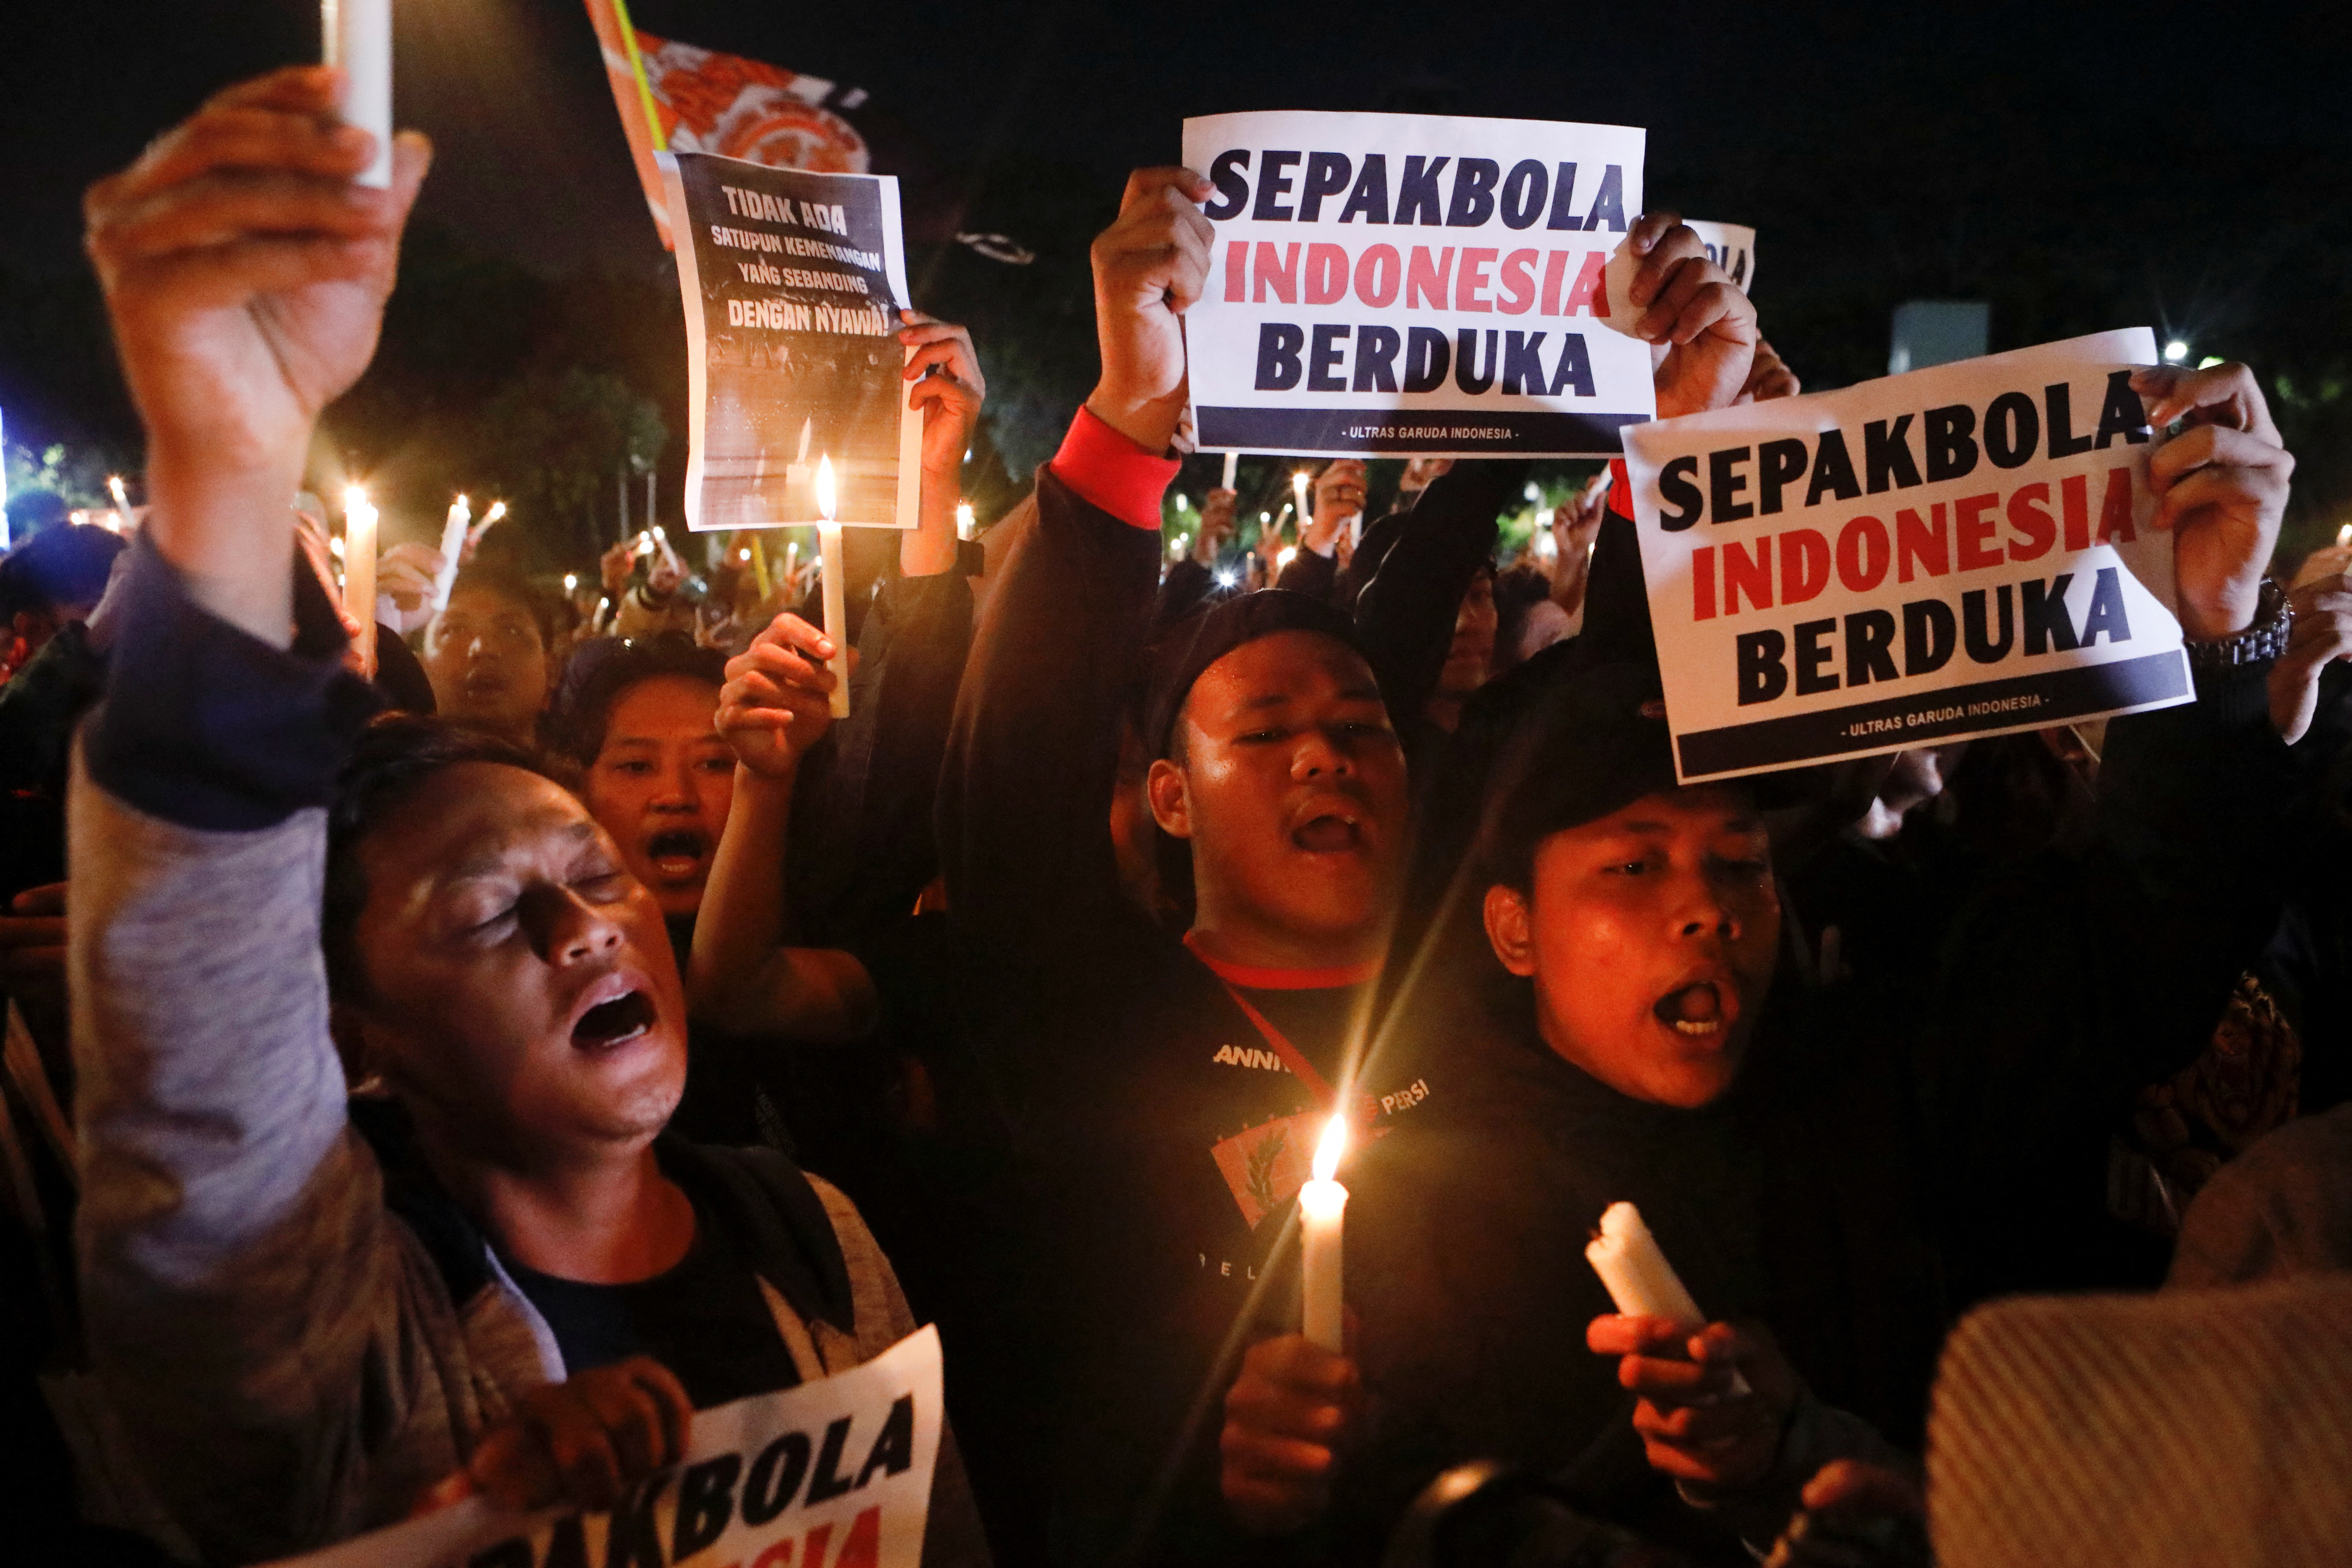 Football fans hold candles and placards during a vigil at Gelora Bung Karno Stadium area, following a riot after the football match between Arema vs Persebaya in Jakarta